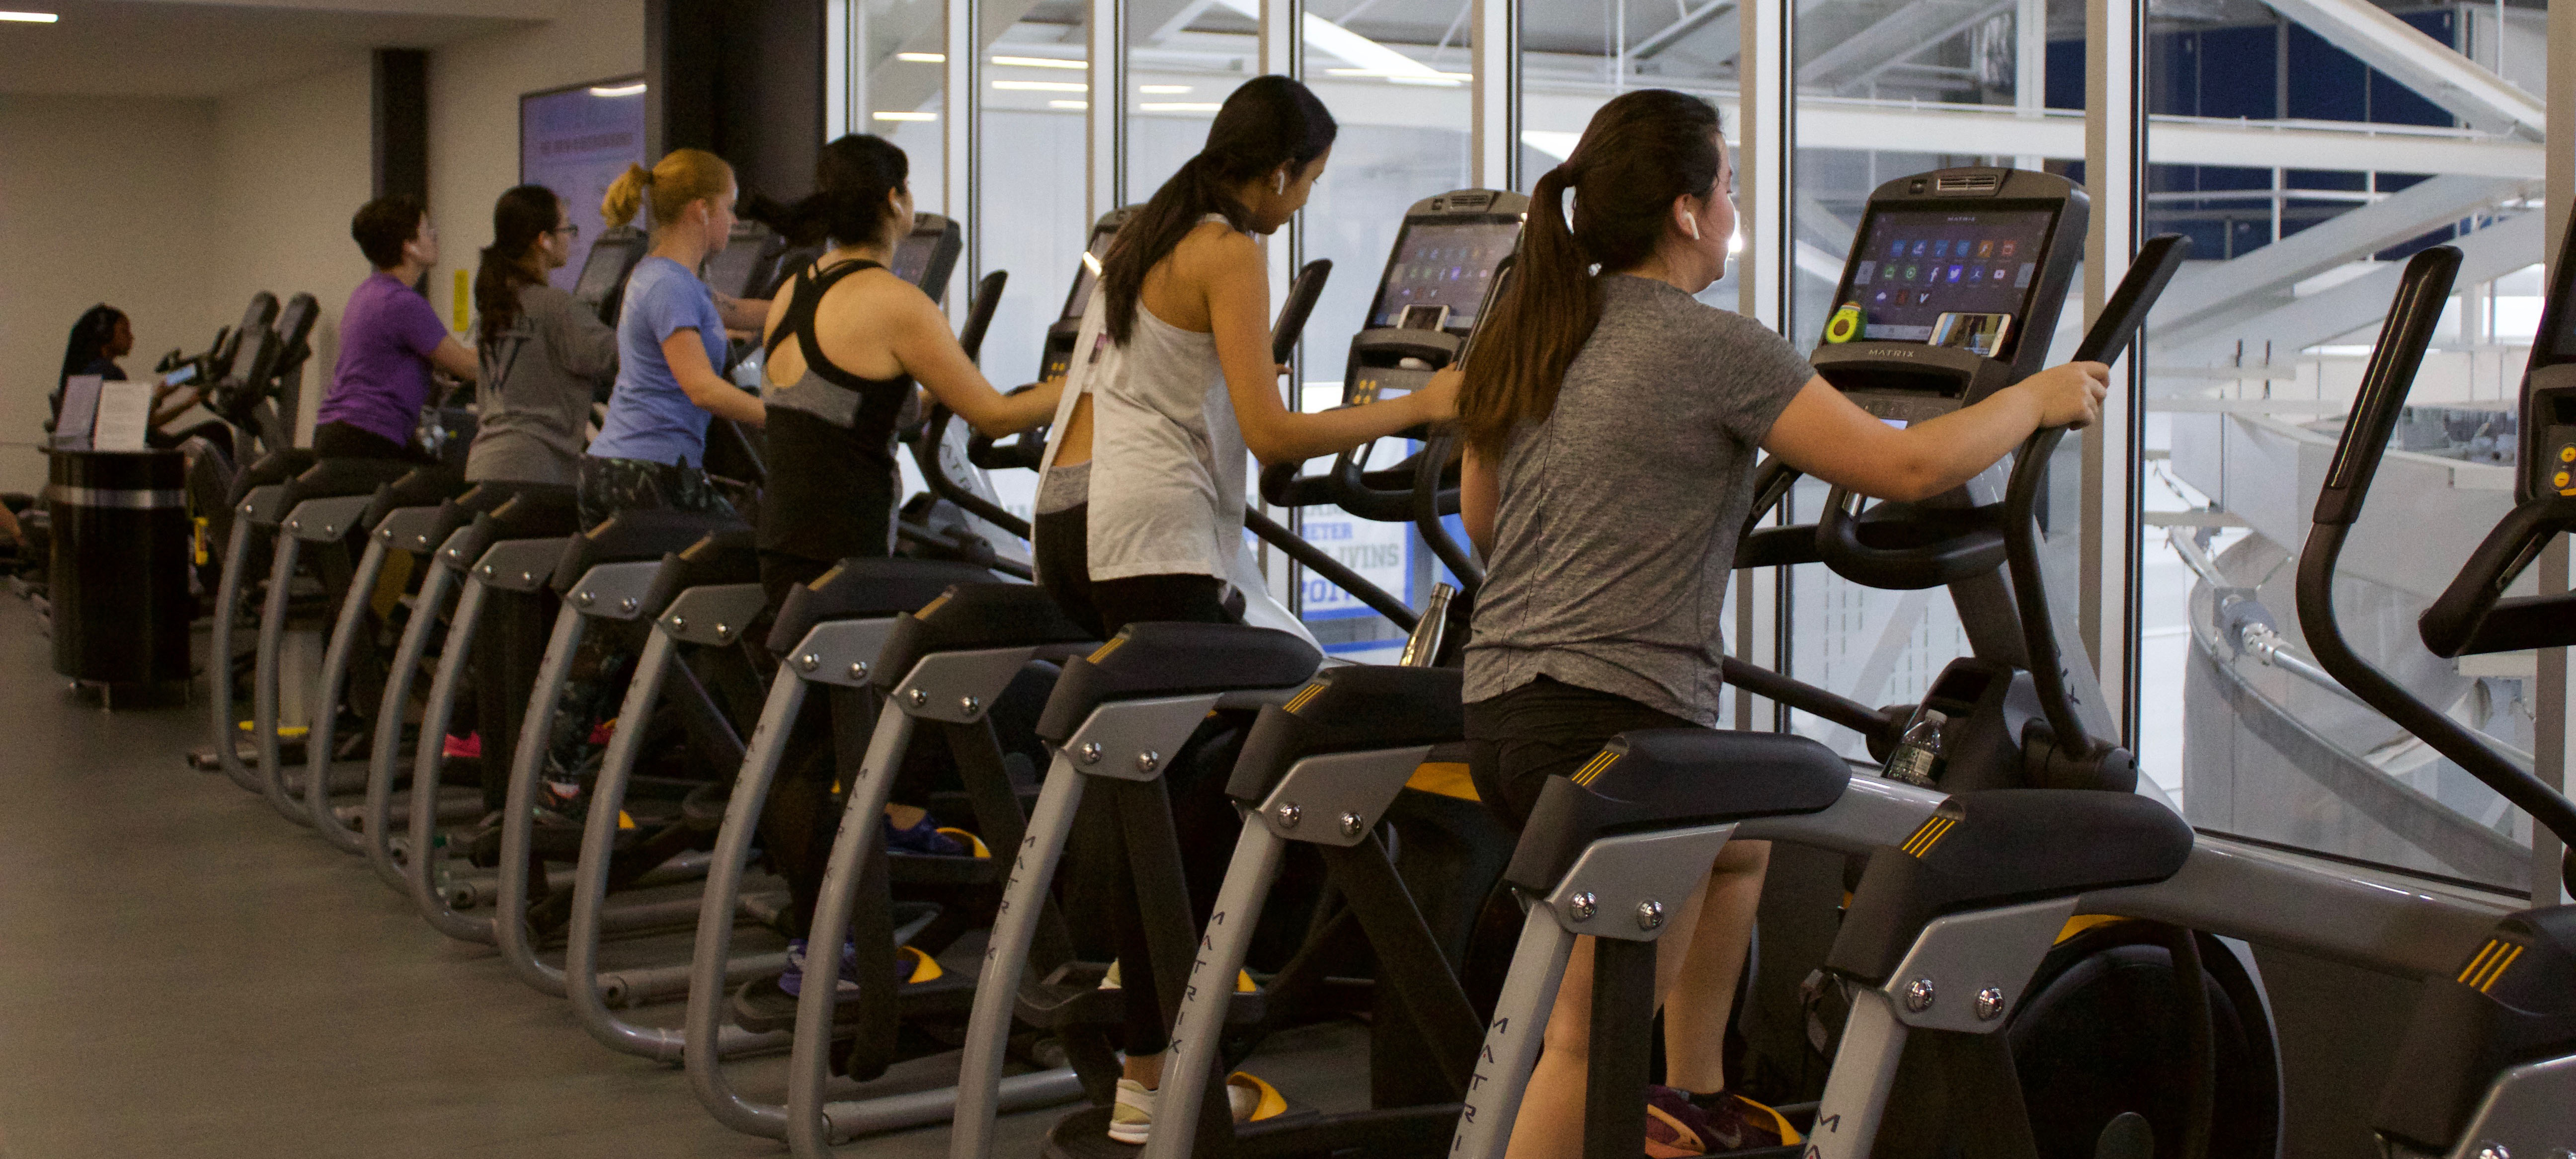 The ellipticals are filled with exercising students facing away from the camera. 